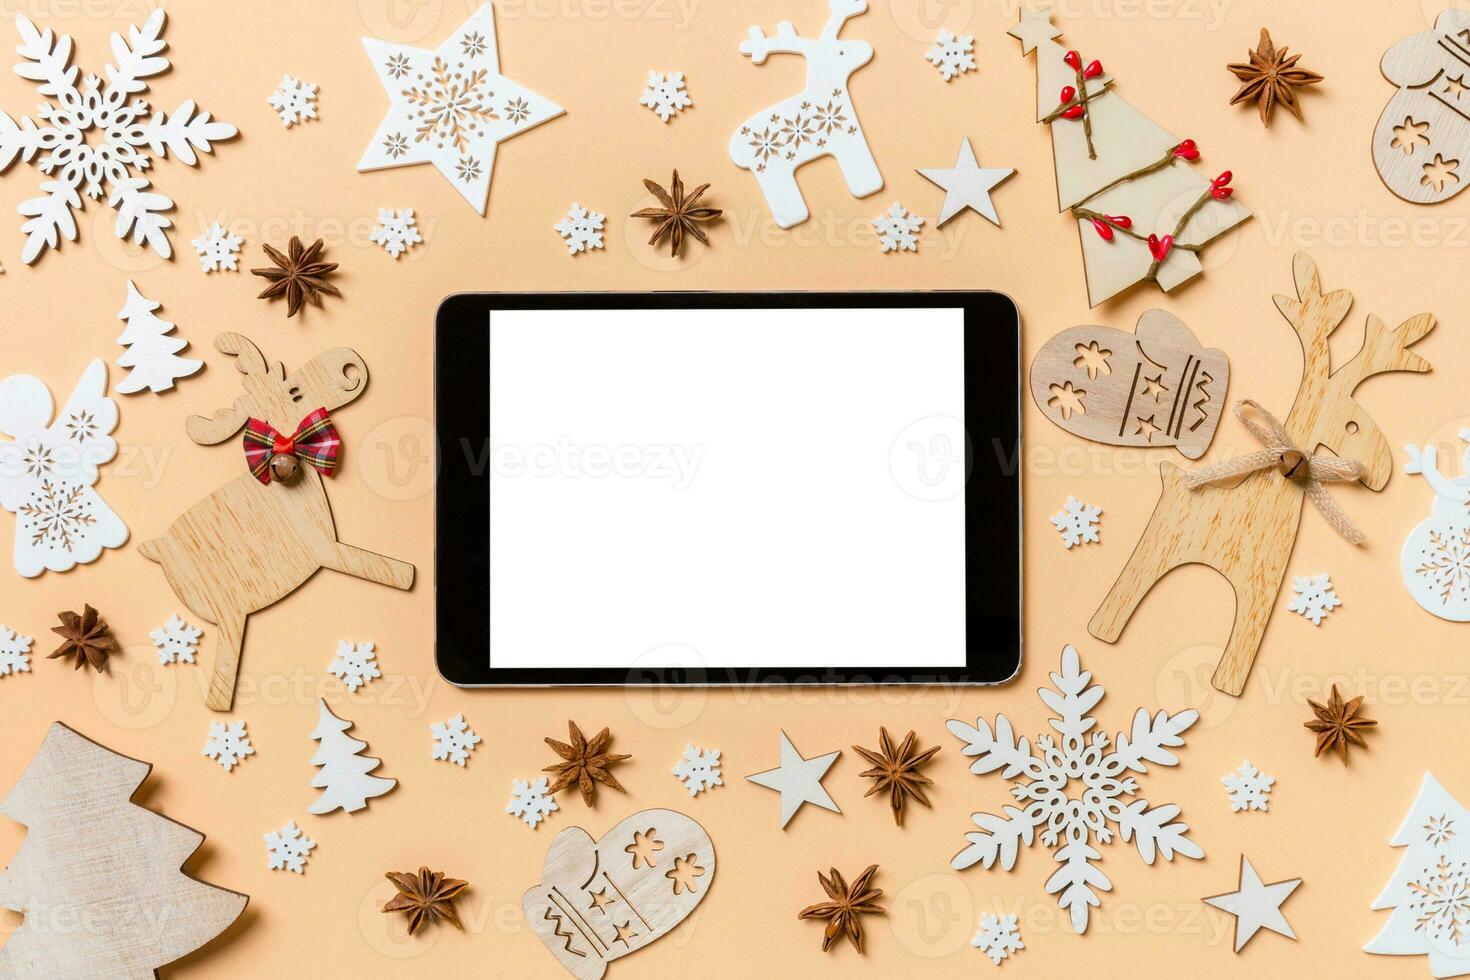 Festive decorations and toys on orange background. Top view of digital tablet. Merry Christmas concept photo